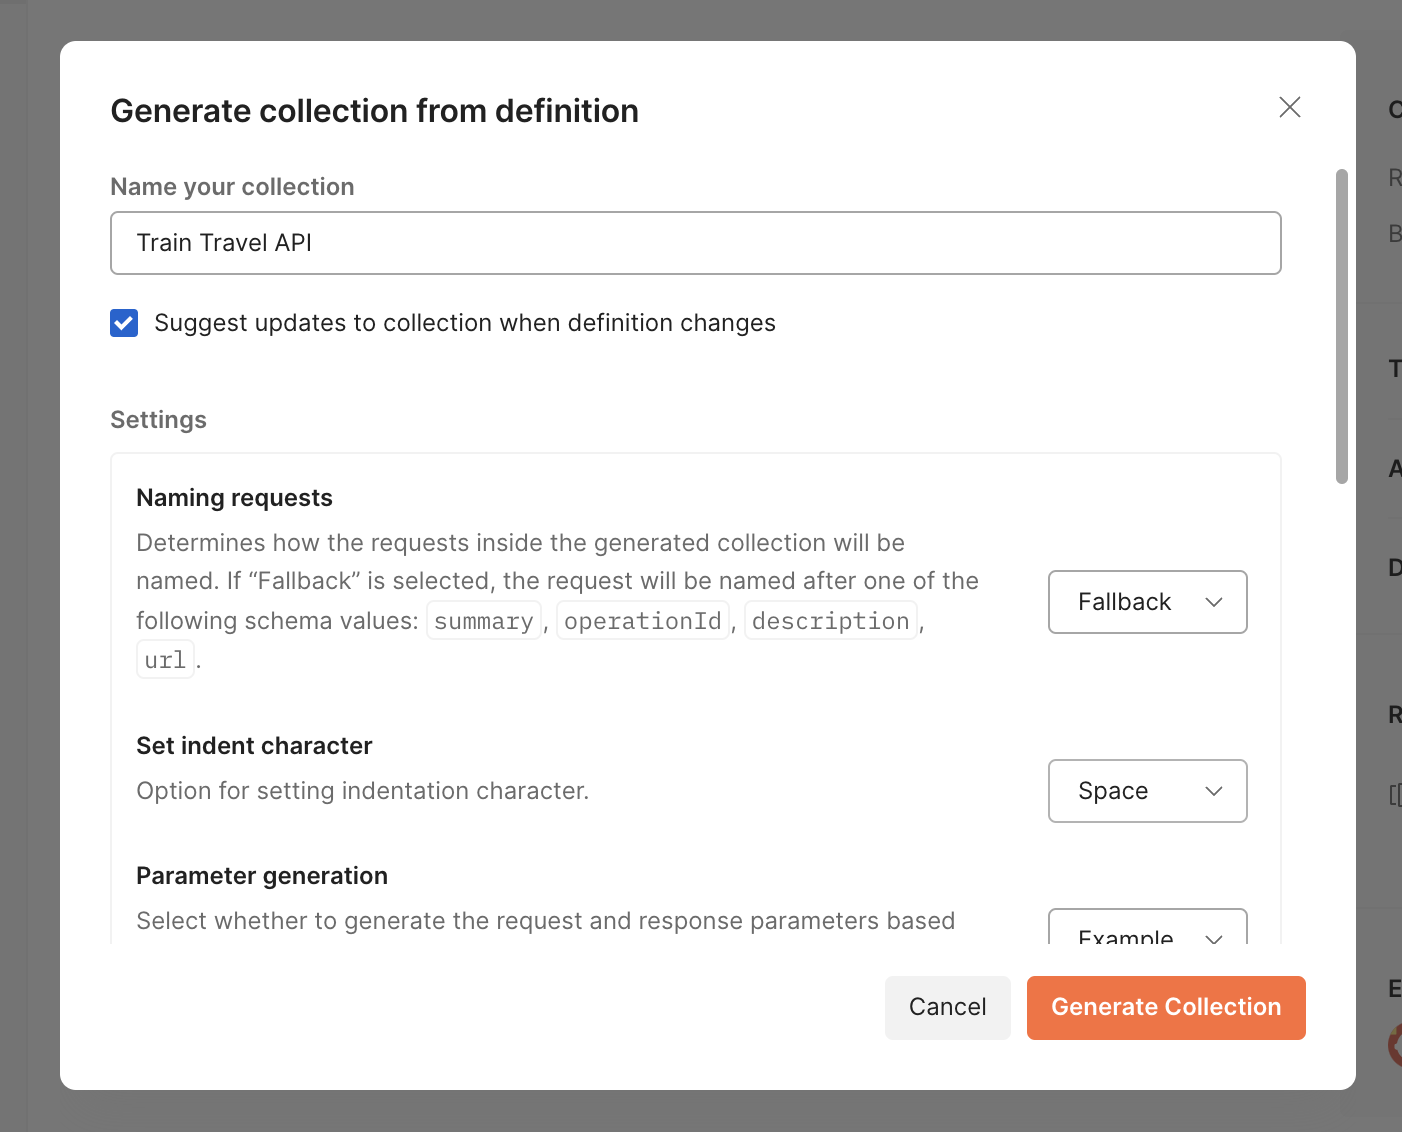 Genereate from definition settings on their defaults, mainly Naming requests set to Fallback